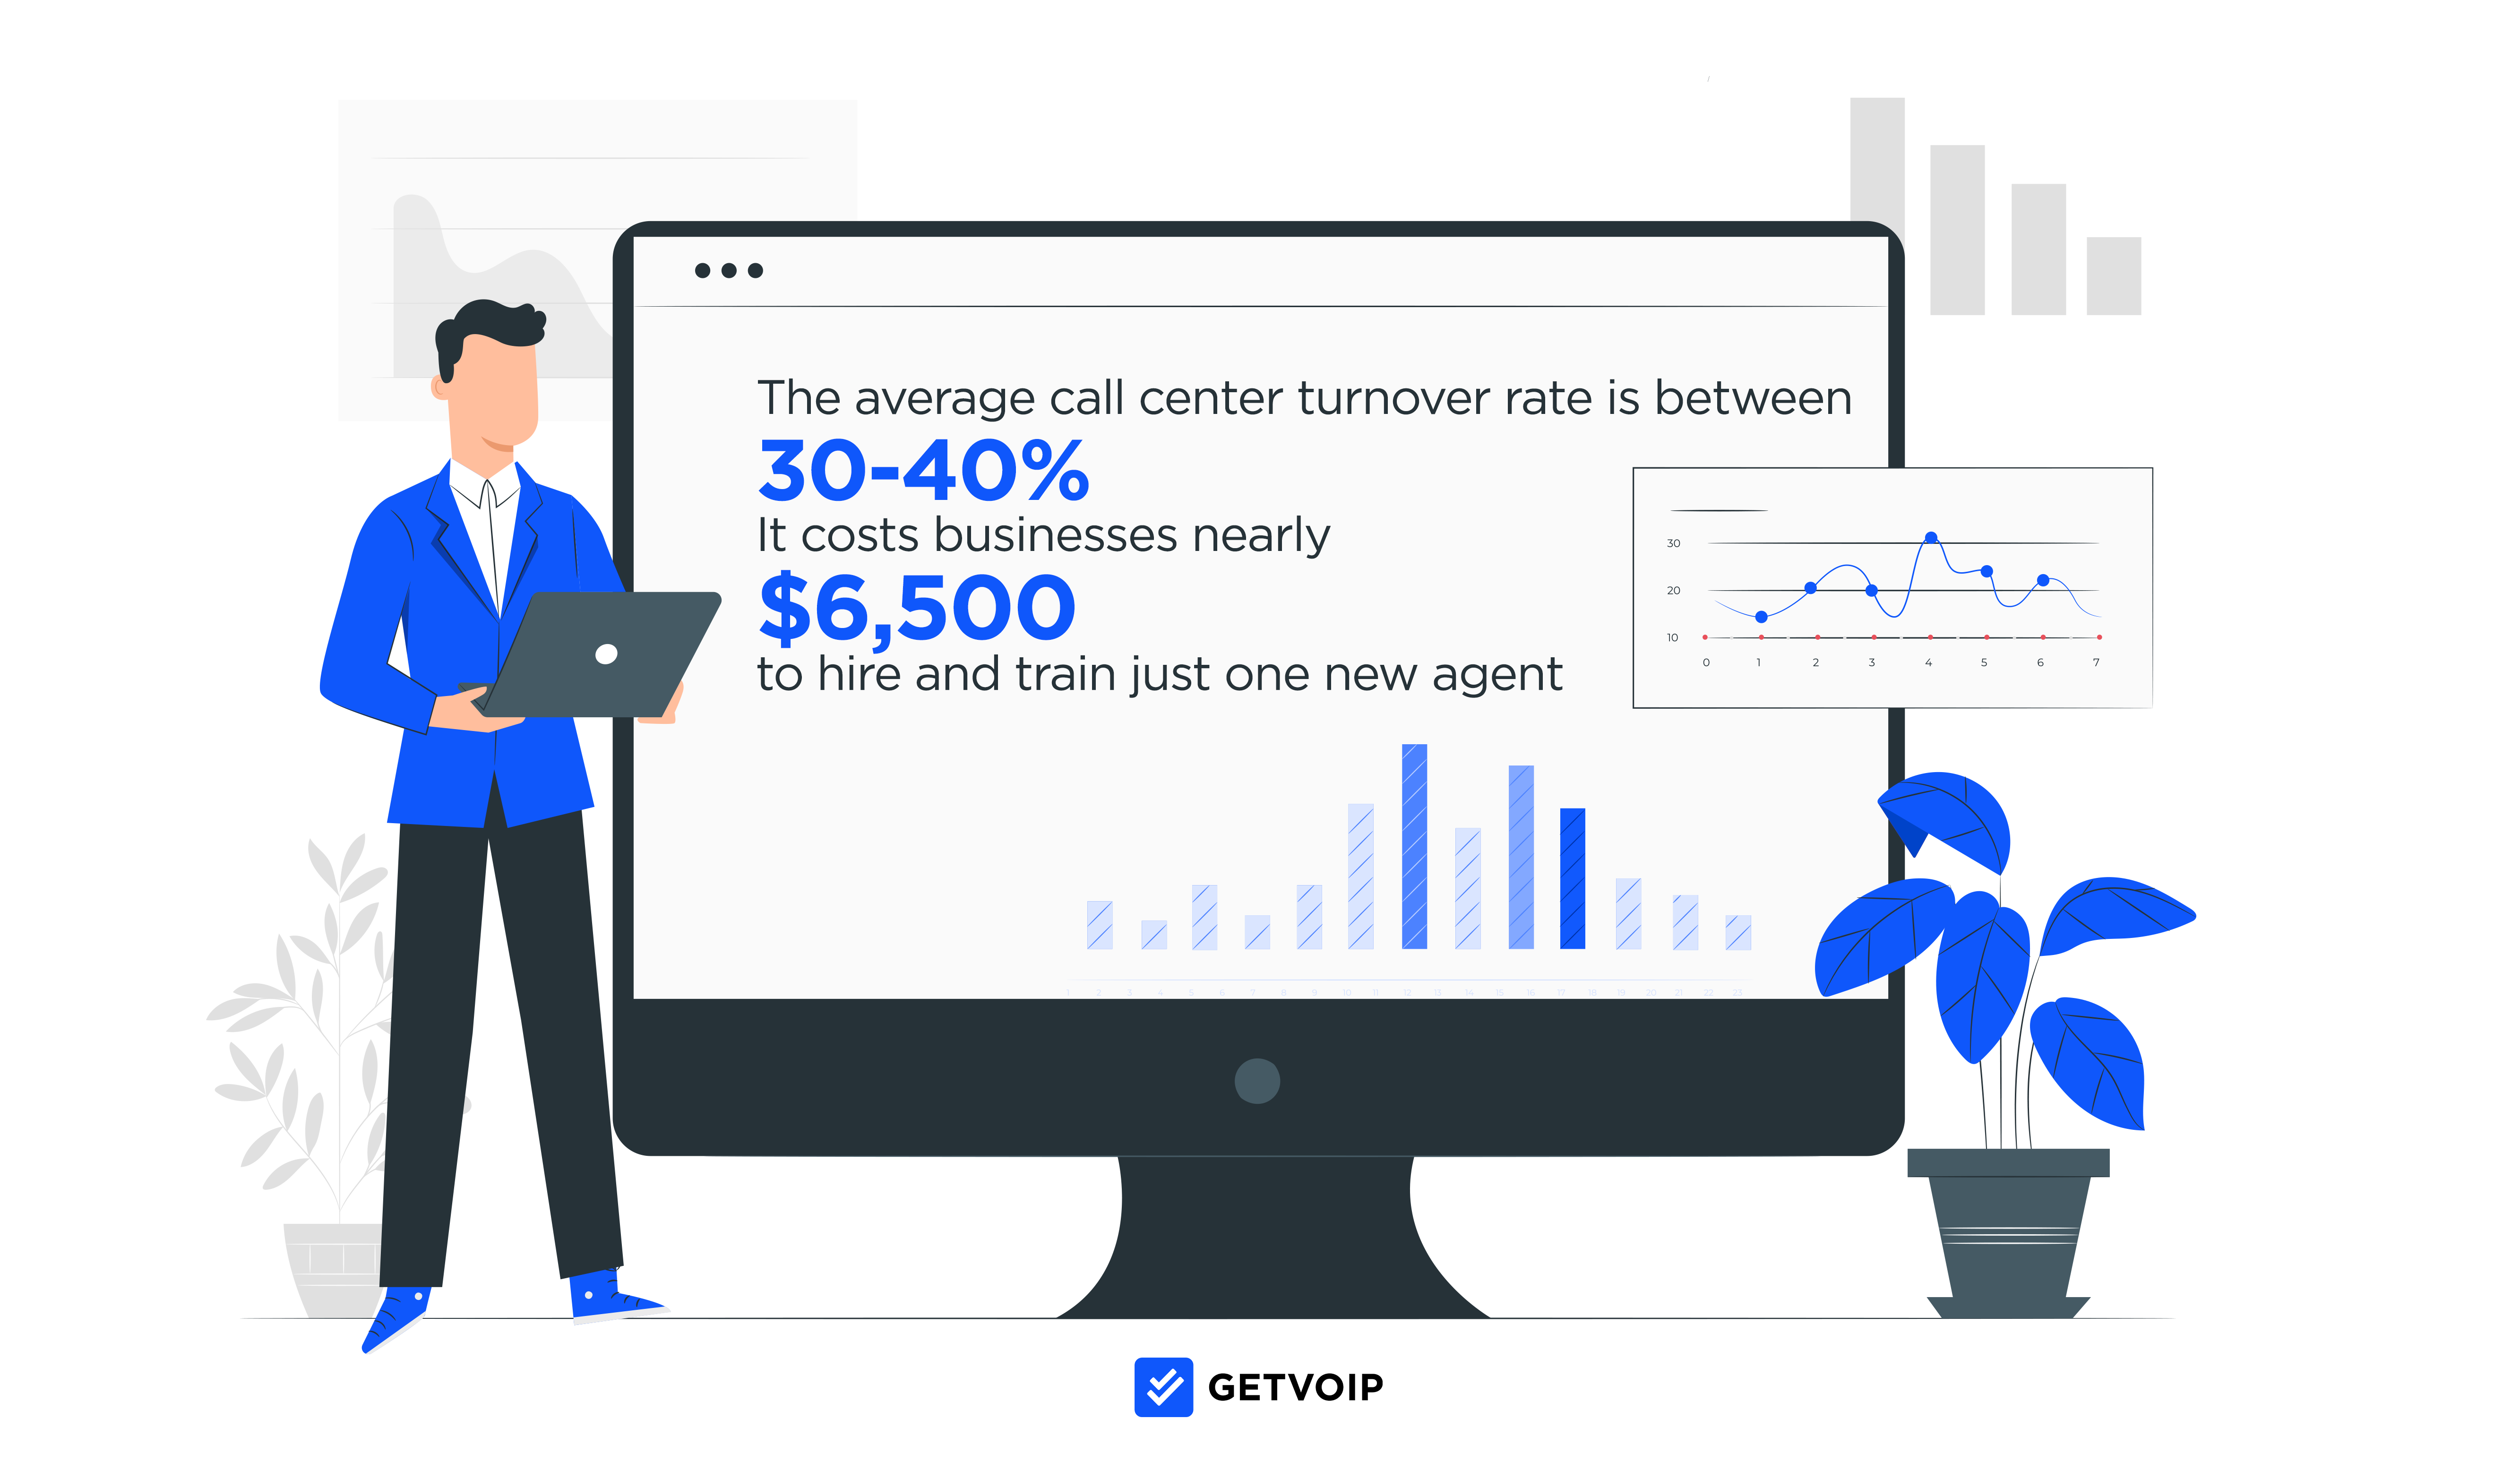 Call center turnover rate